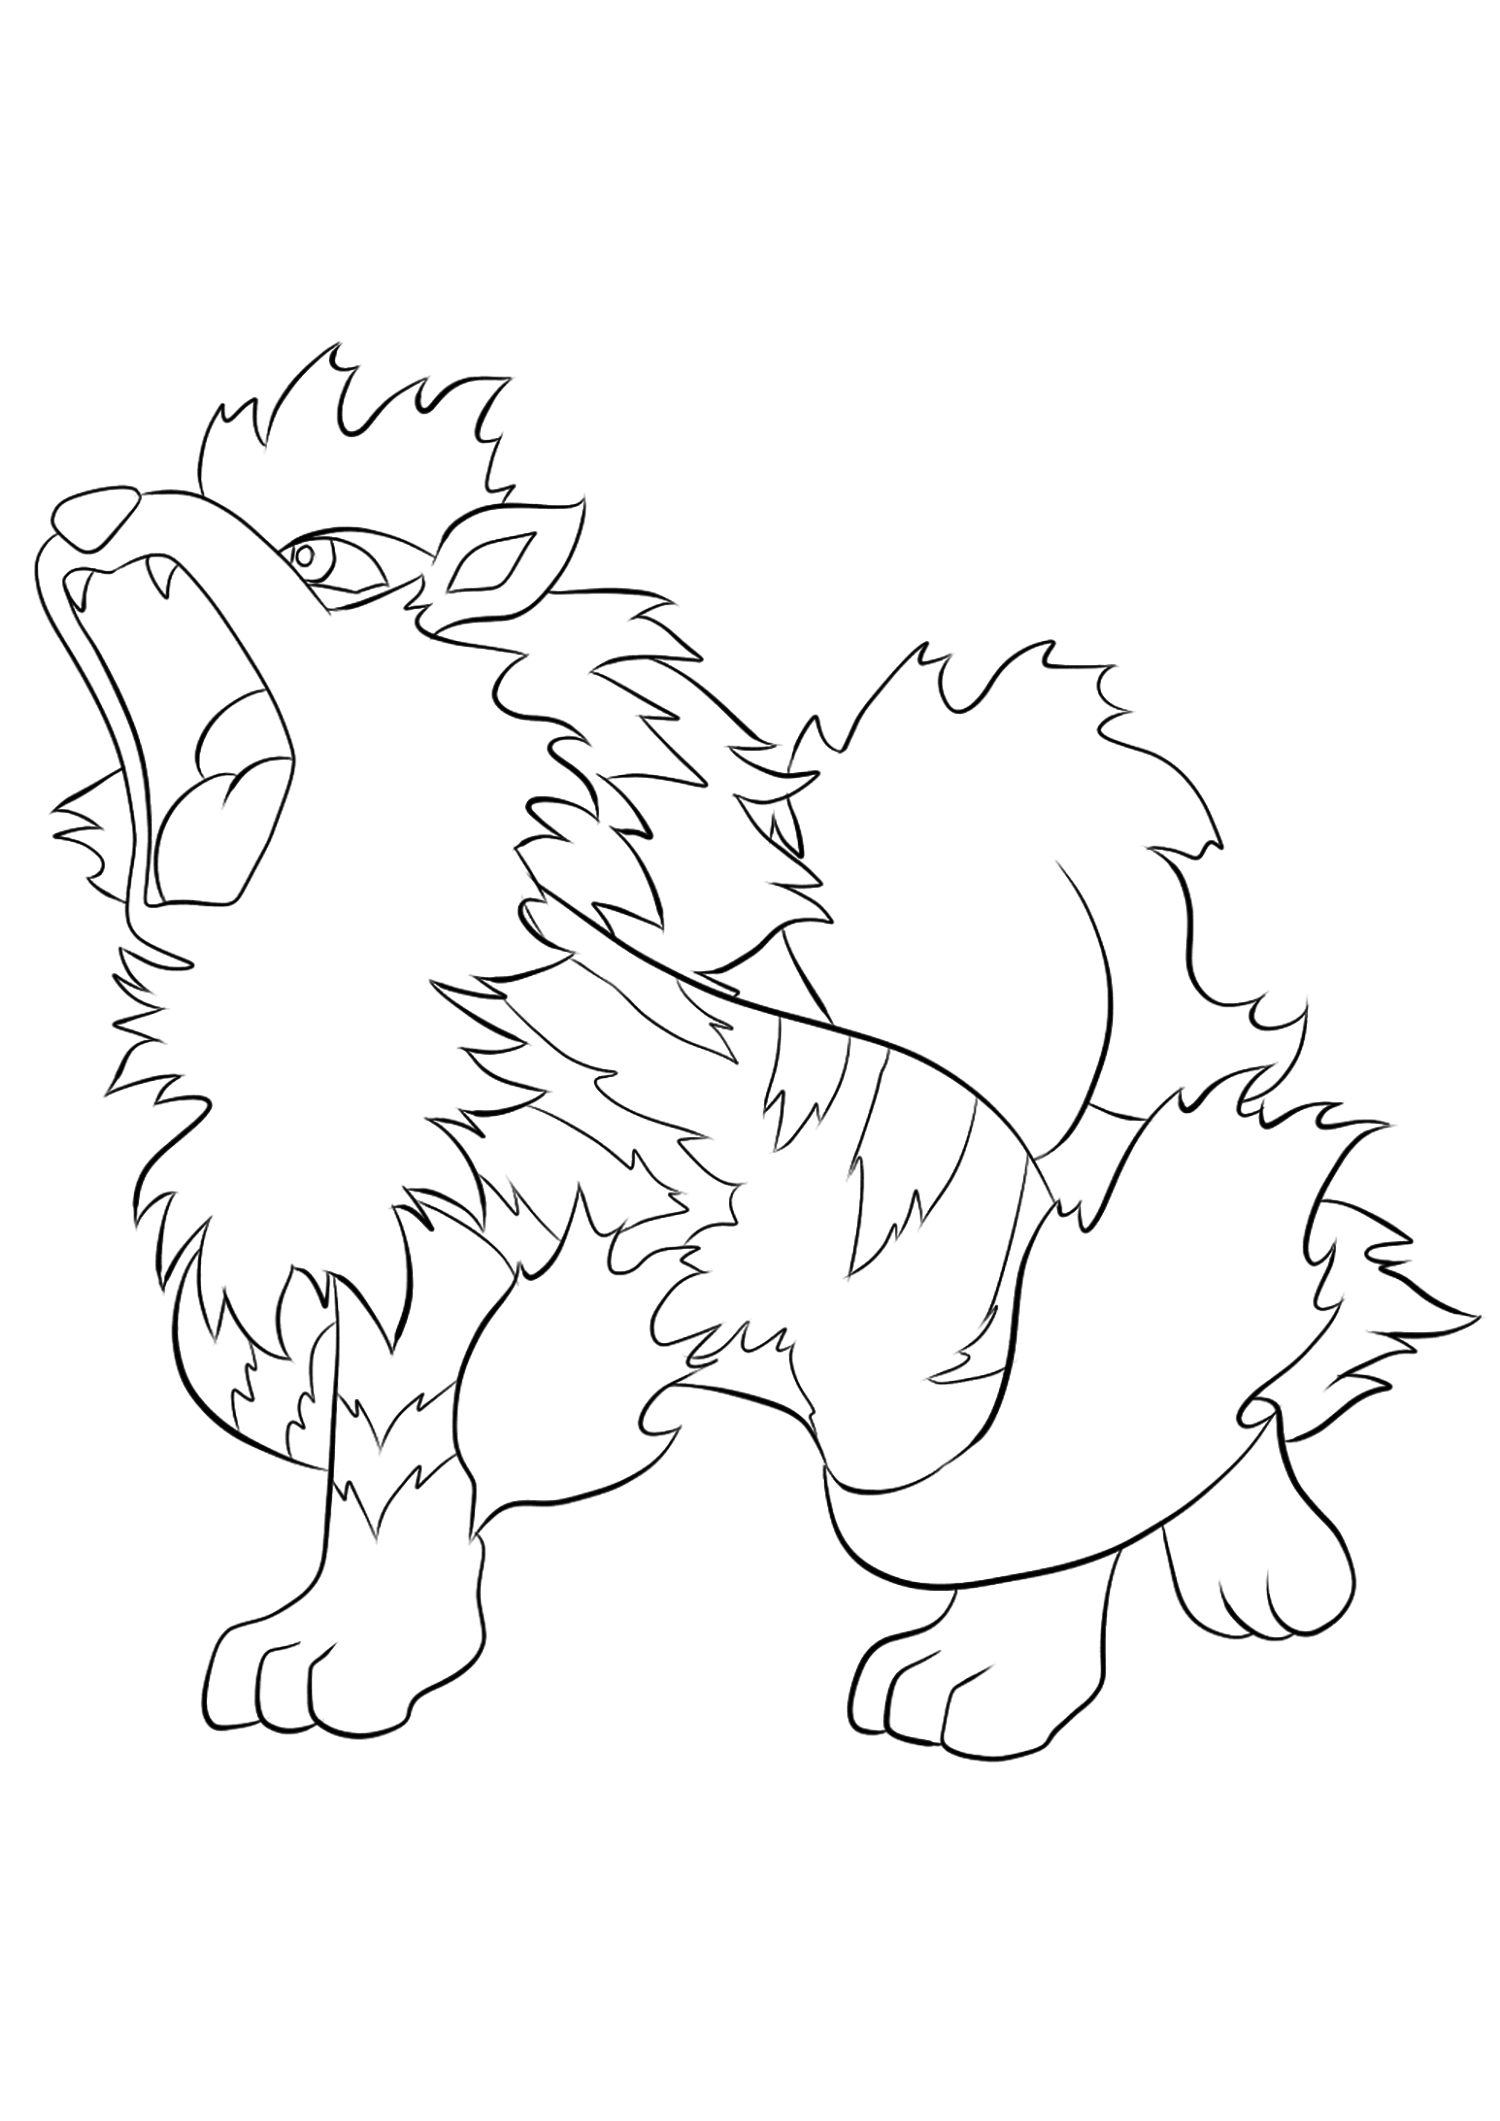 Arcanine No.59 : Pokemon Generation I - All Pokemon coloring pages ...